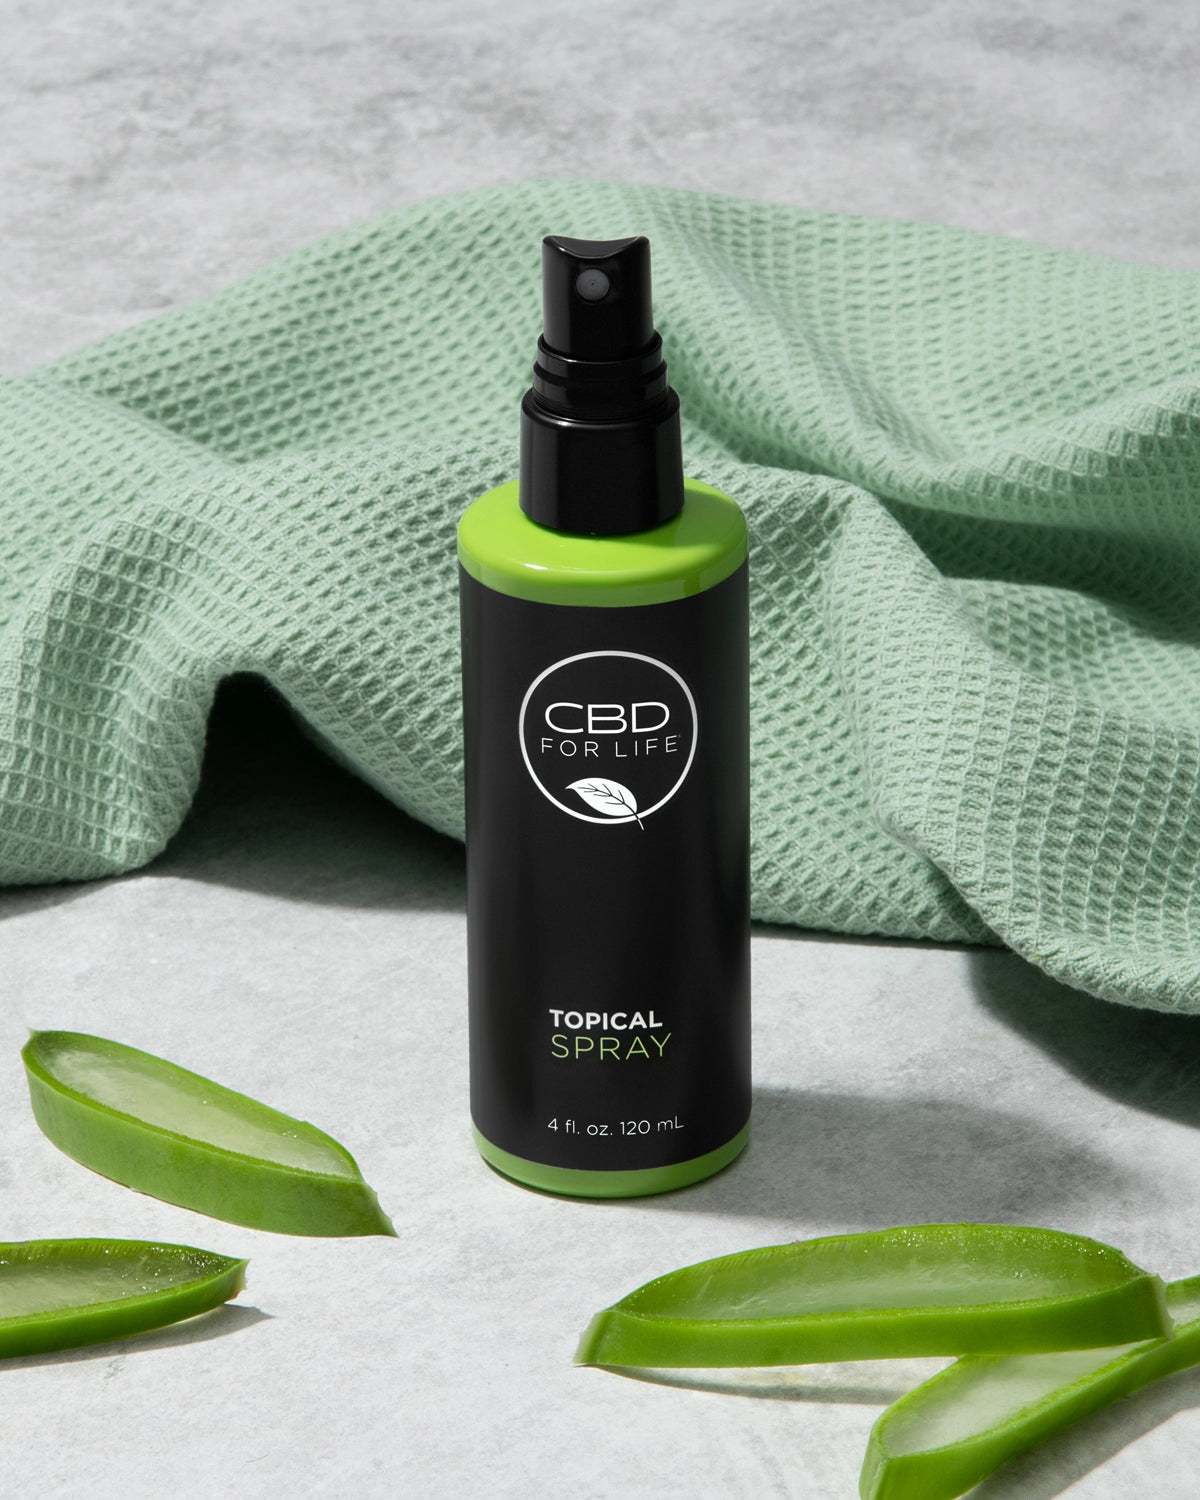 The cooling combination of phytonutrient-rich CBD, menthol and aloe vera in our Topical Spray is the ultimate reset. Spray and go